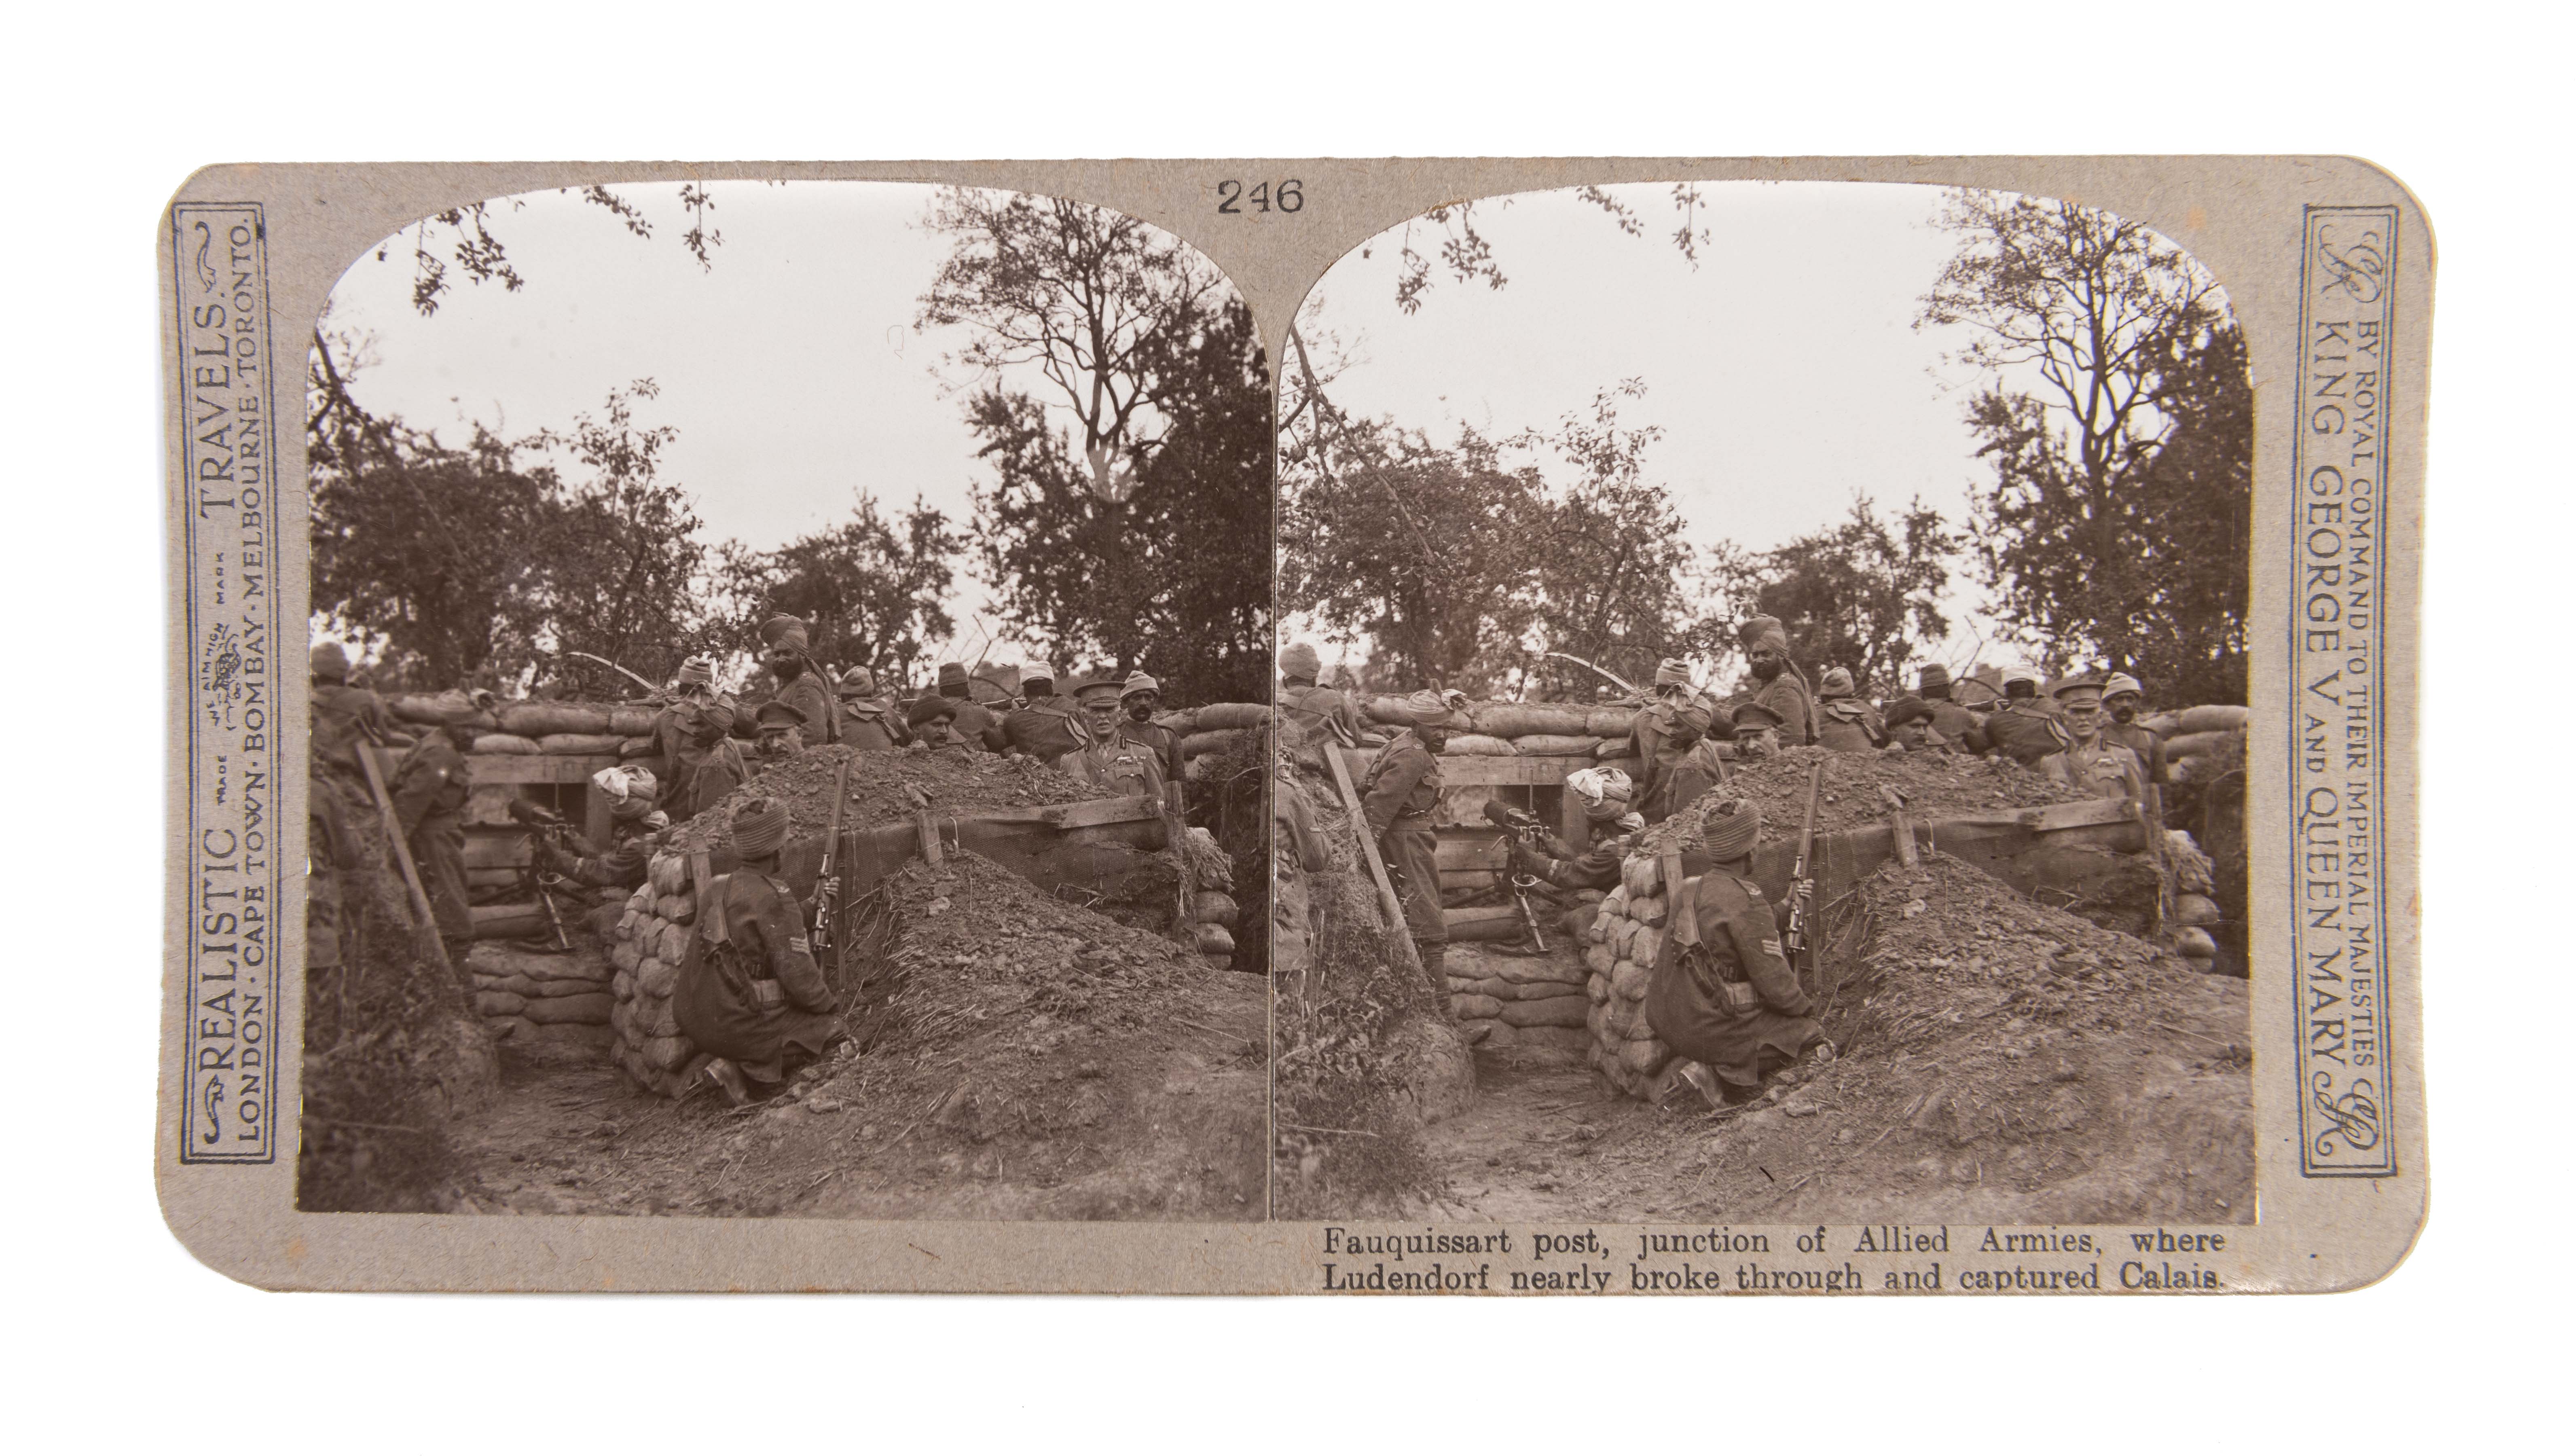 o WW1 Stereoscopic Card Stereoview Realistic Travels World War One 1914 to 1918 